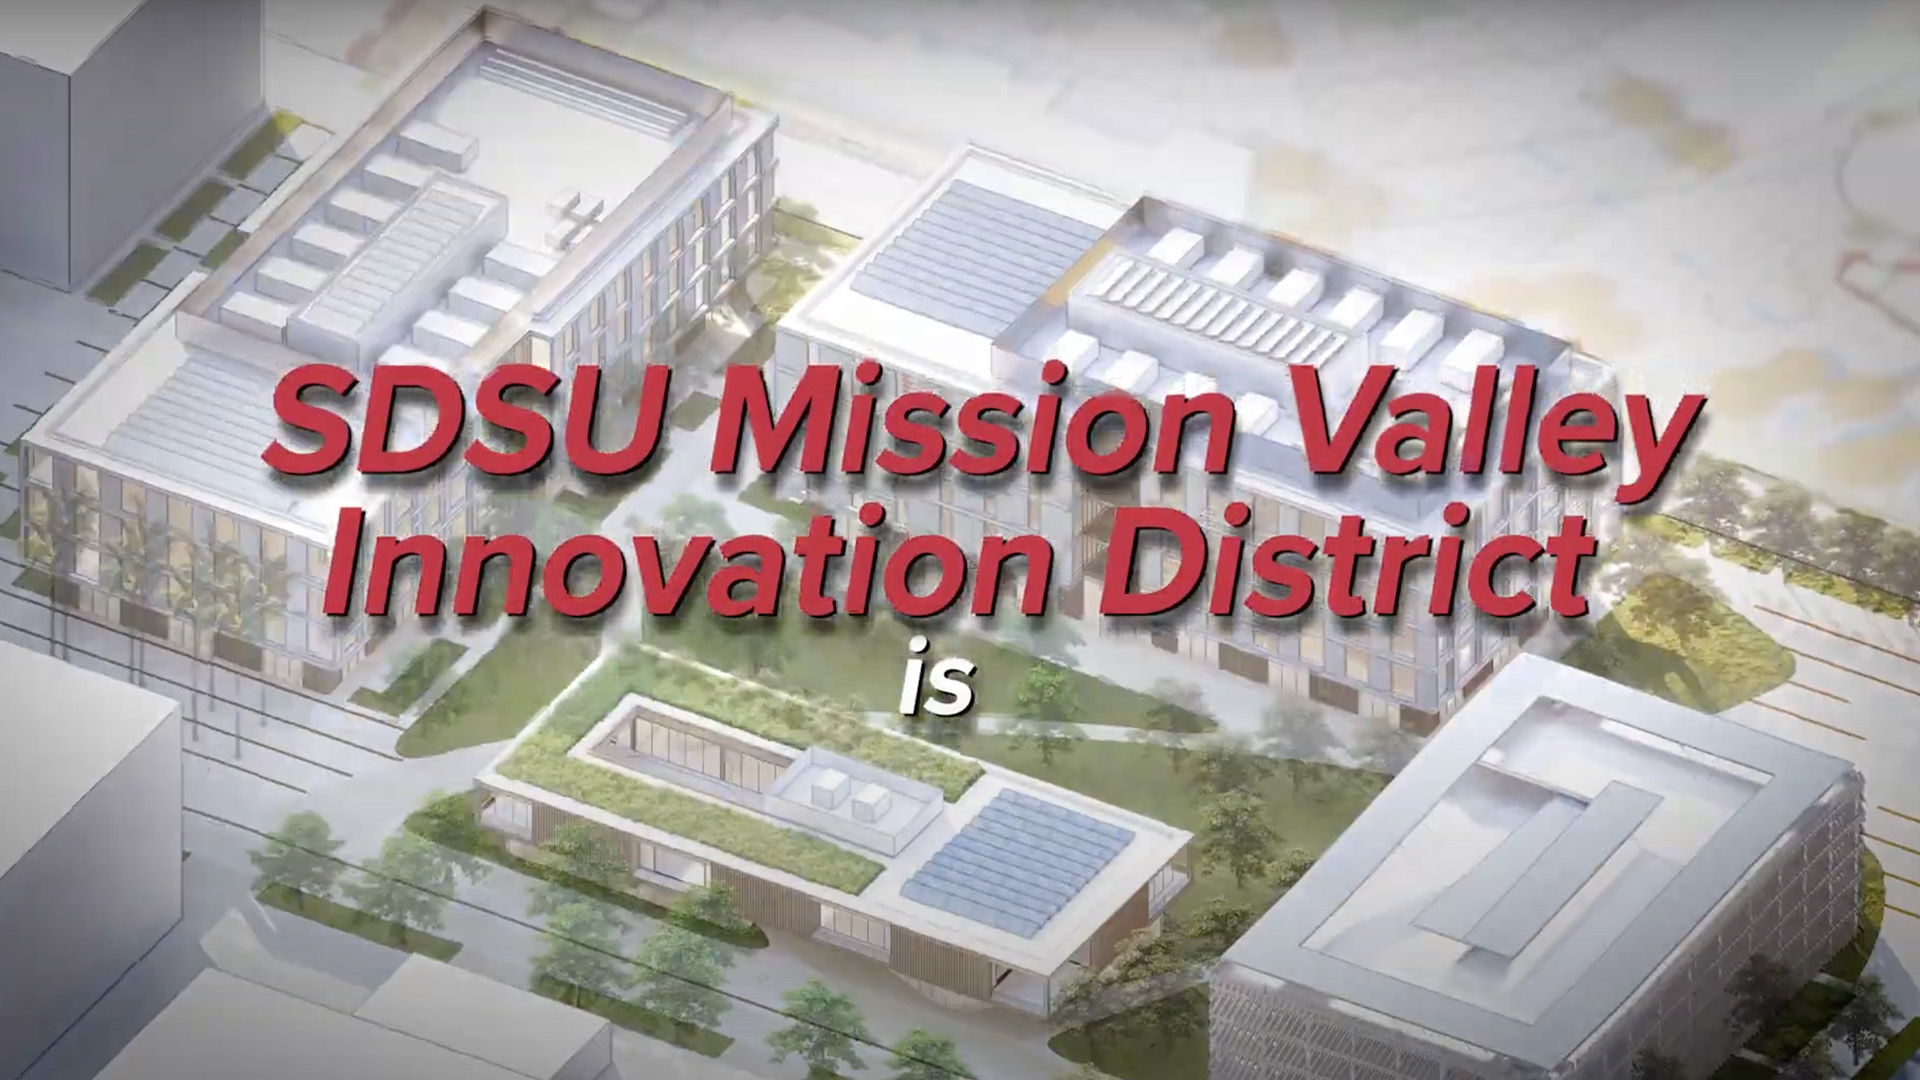 Rendering of phase 1 of innovation district with red text that reads SDSU Mission Valley Innovation District is